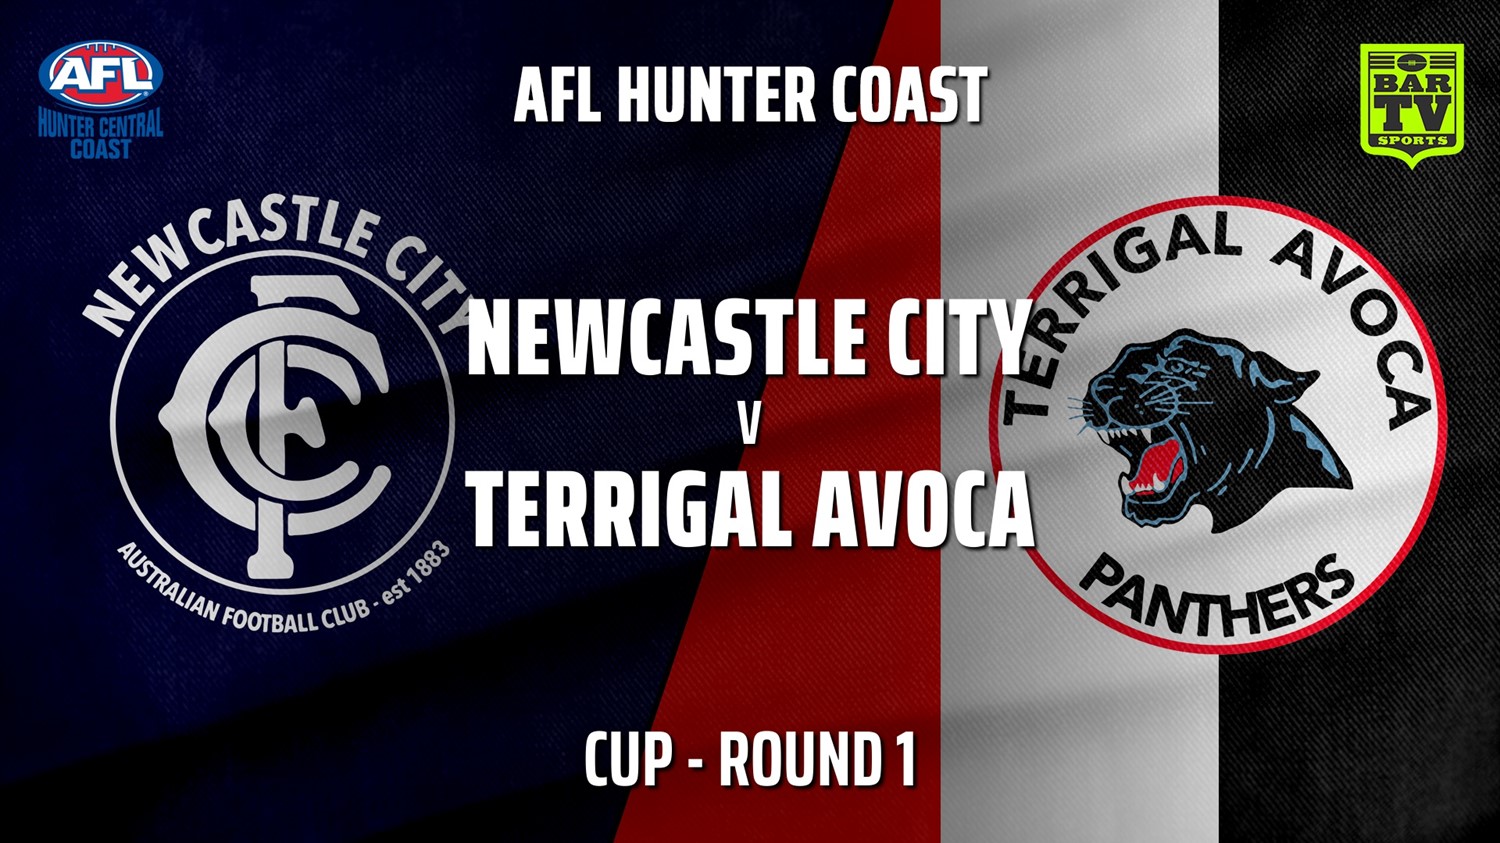 AFL HCC Round 1 - Cup - Newcastle City  v Terrigal Avoca Panthers Minigame Slate Image